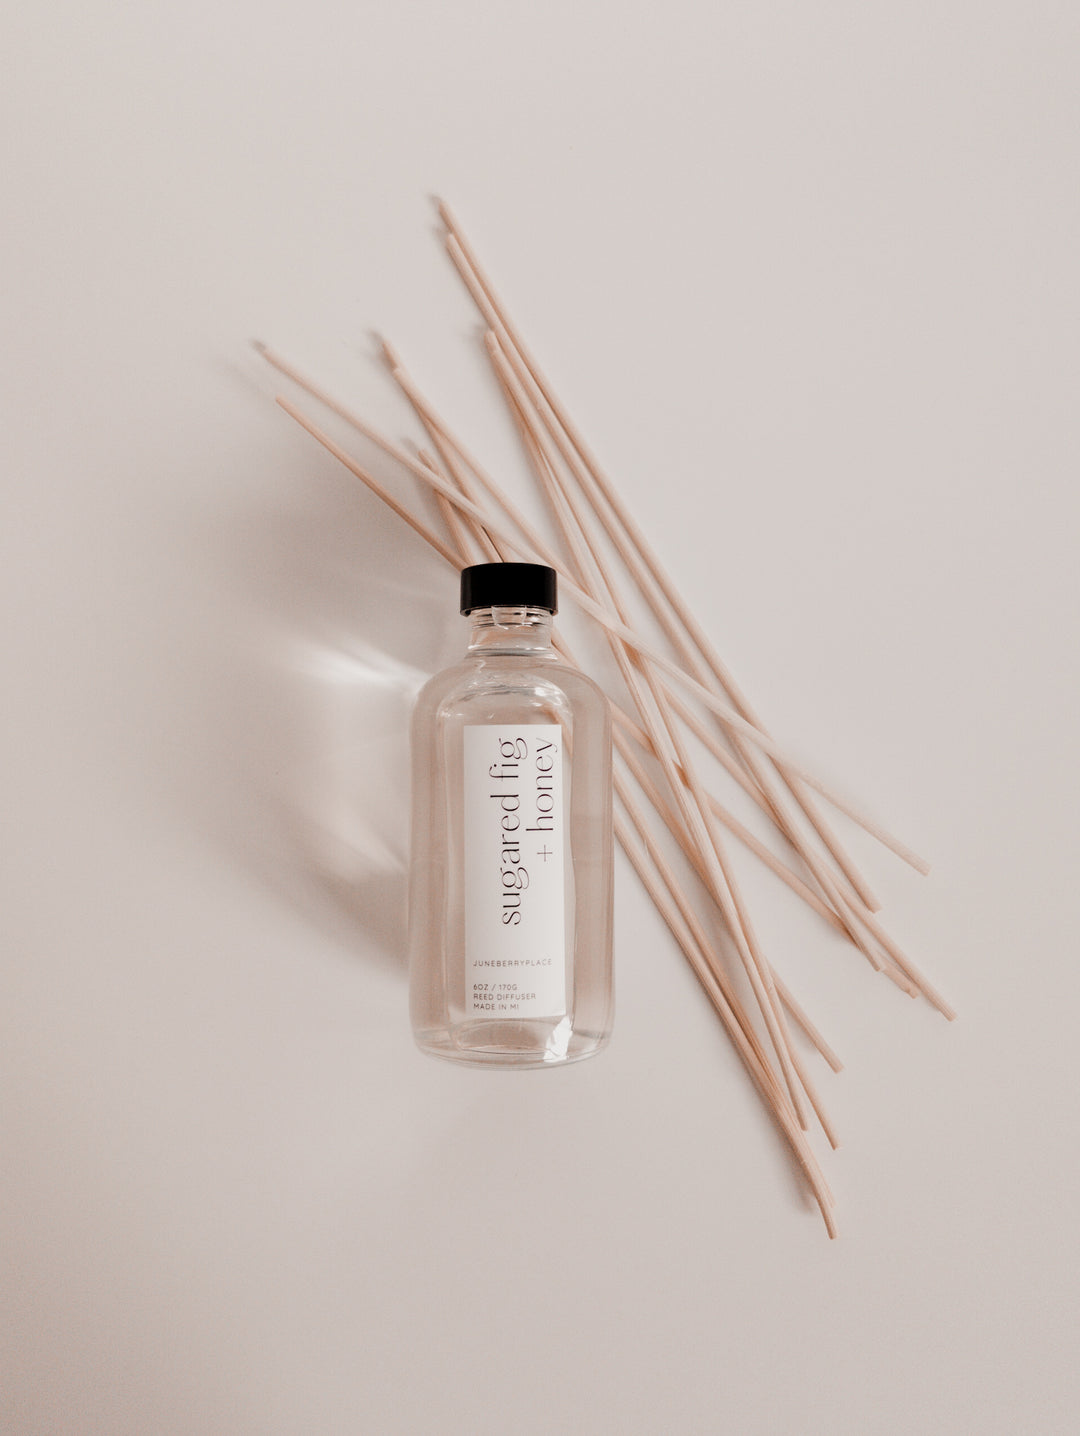 Sugared Fig and Honey reed diffuser: Winter Collection.  Modern clear glass, non-toxic formula. For home fragrance fans who love a clean aesthetic